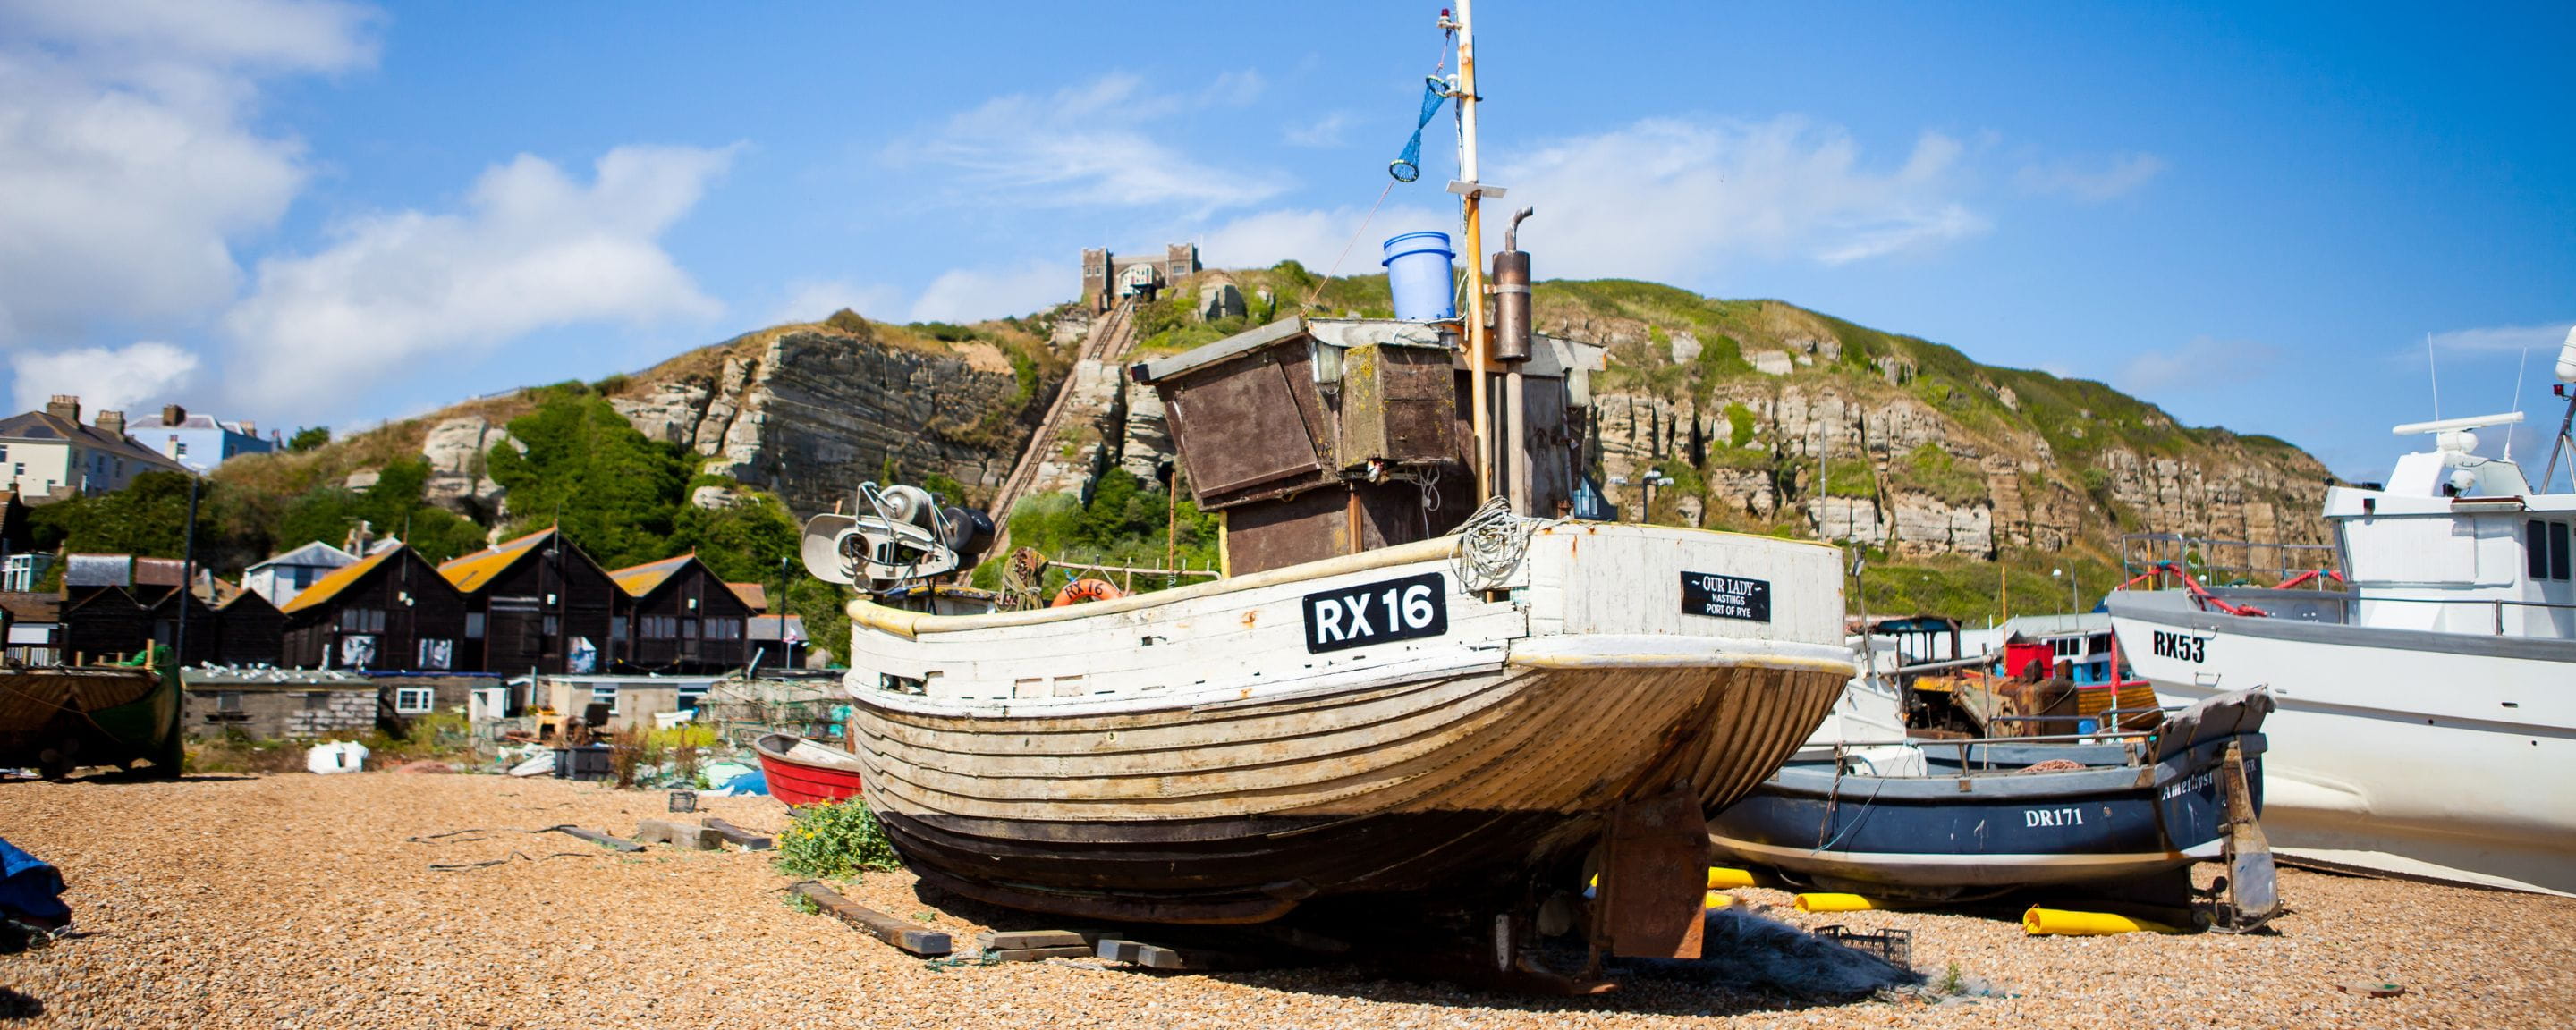 a fishing boat on the beach, Hastings funicular in the background